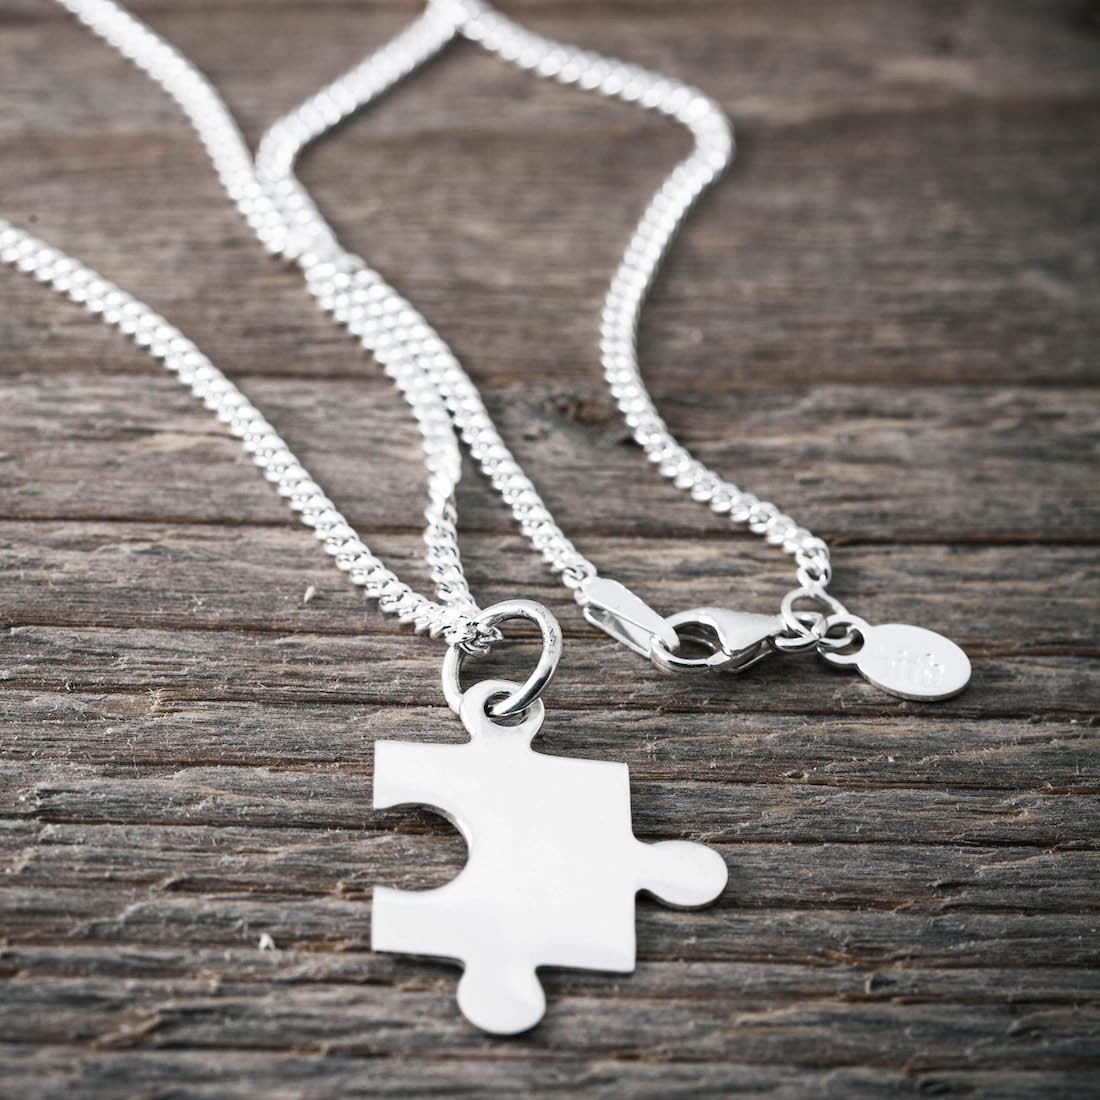 Jigsaw Puzzle Necklaces for Best Friends or Couple – LAONATO